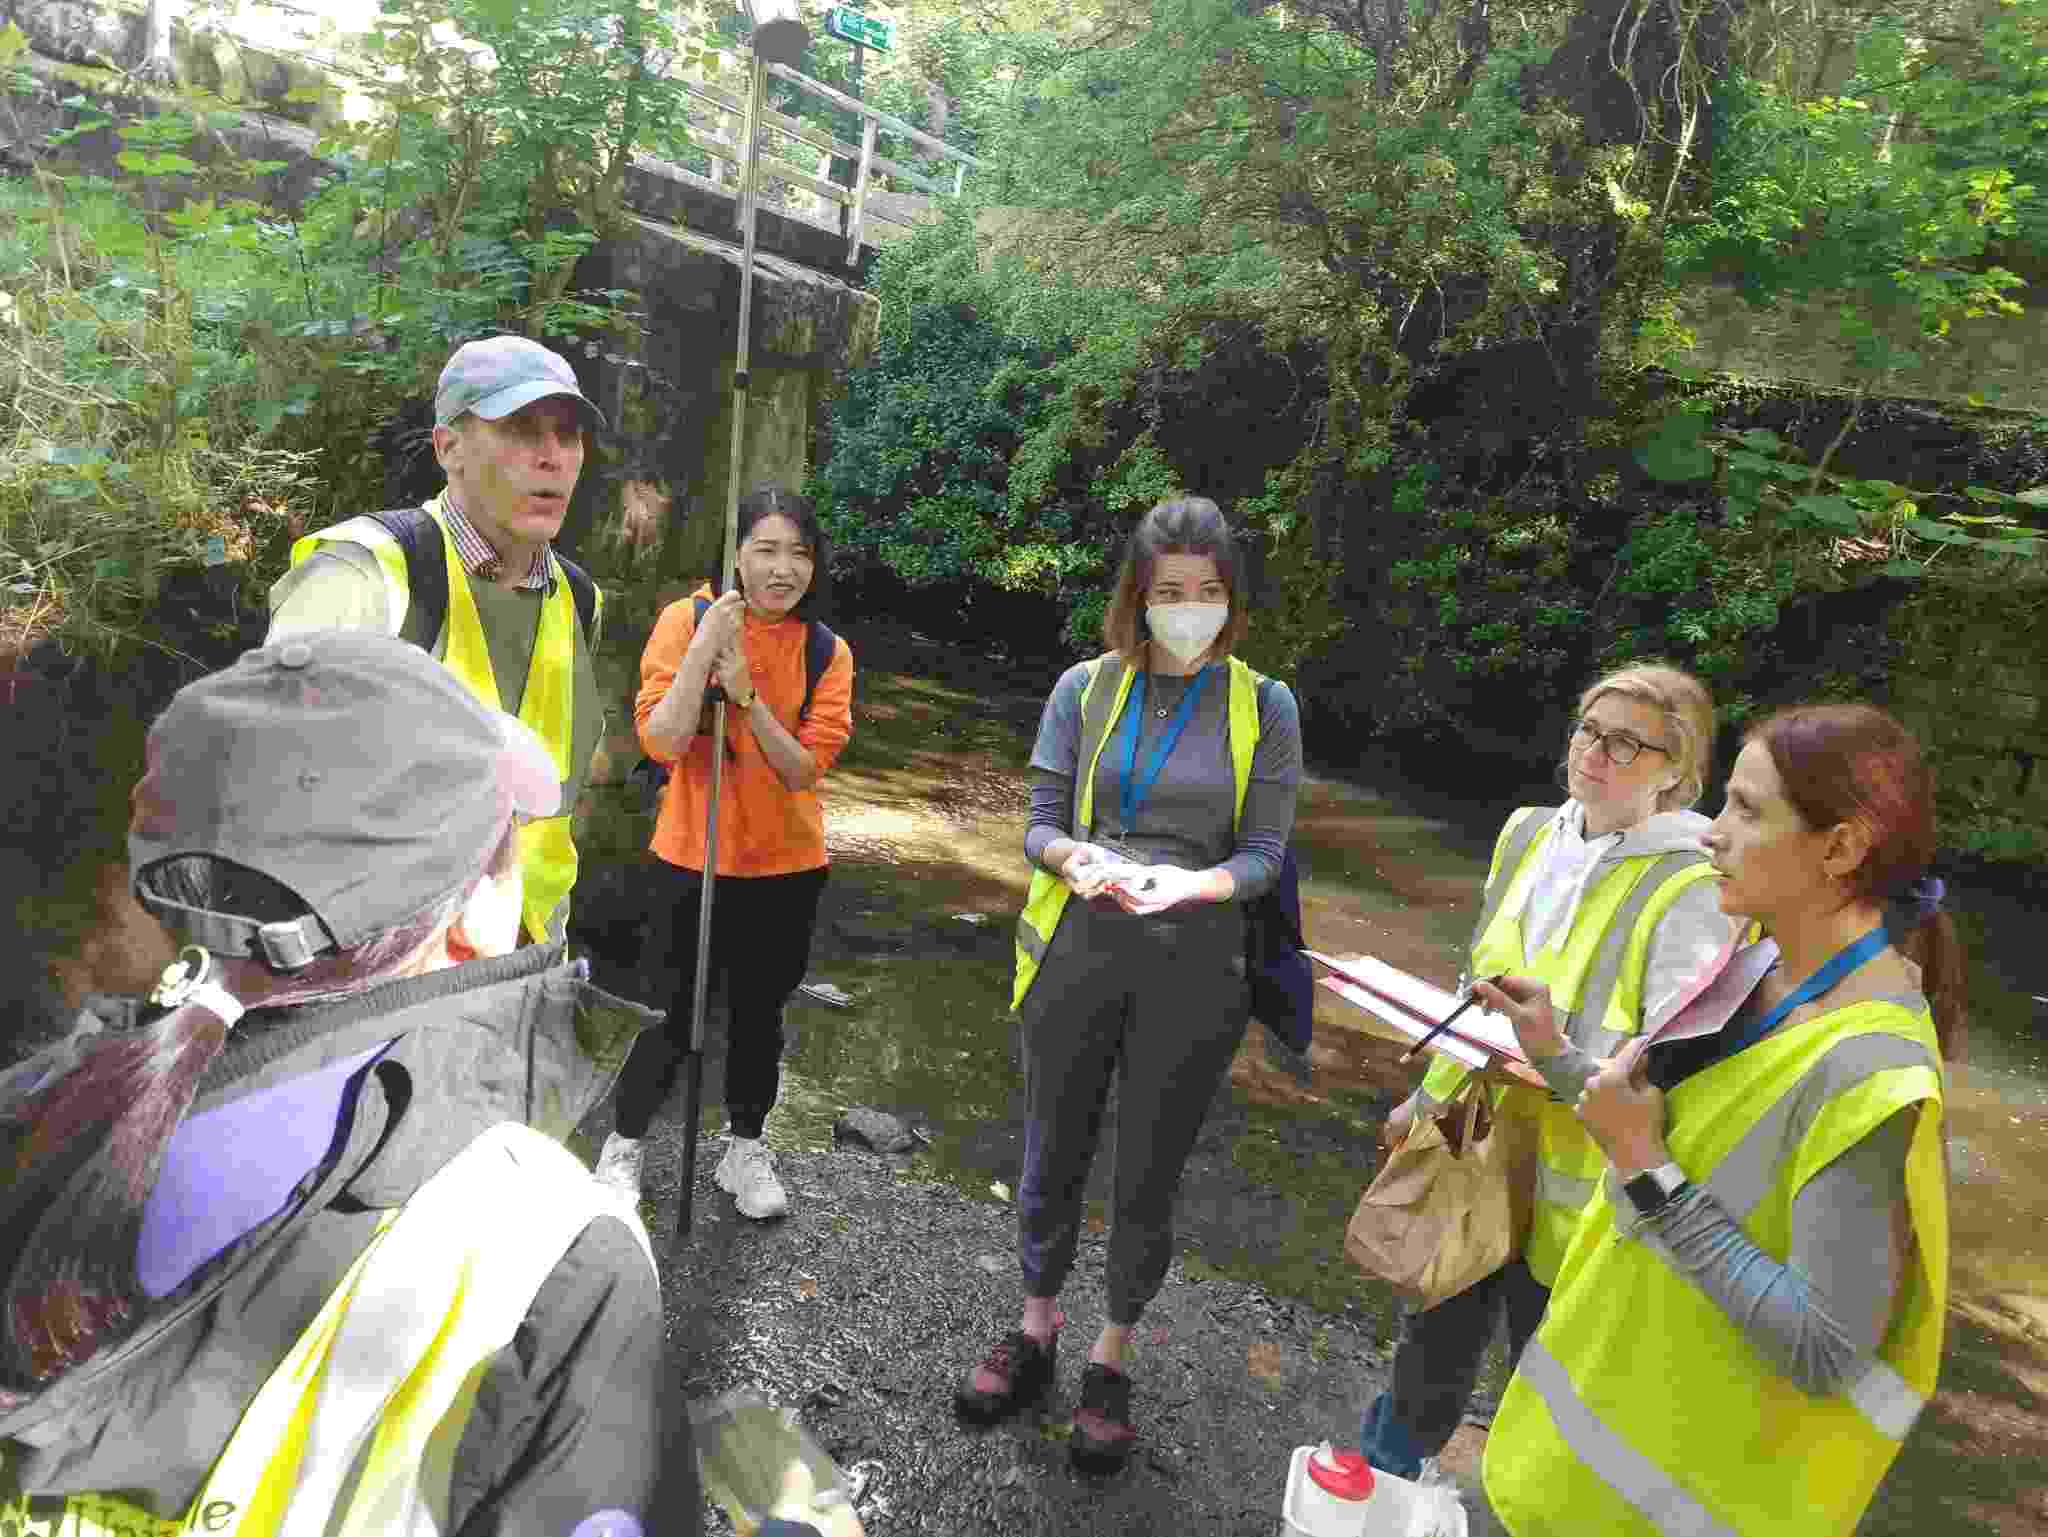 Workshop participants, wearing high vis jackets, conducting field work on the river Ouseburn